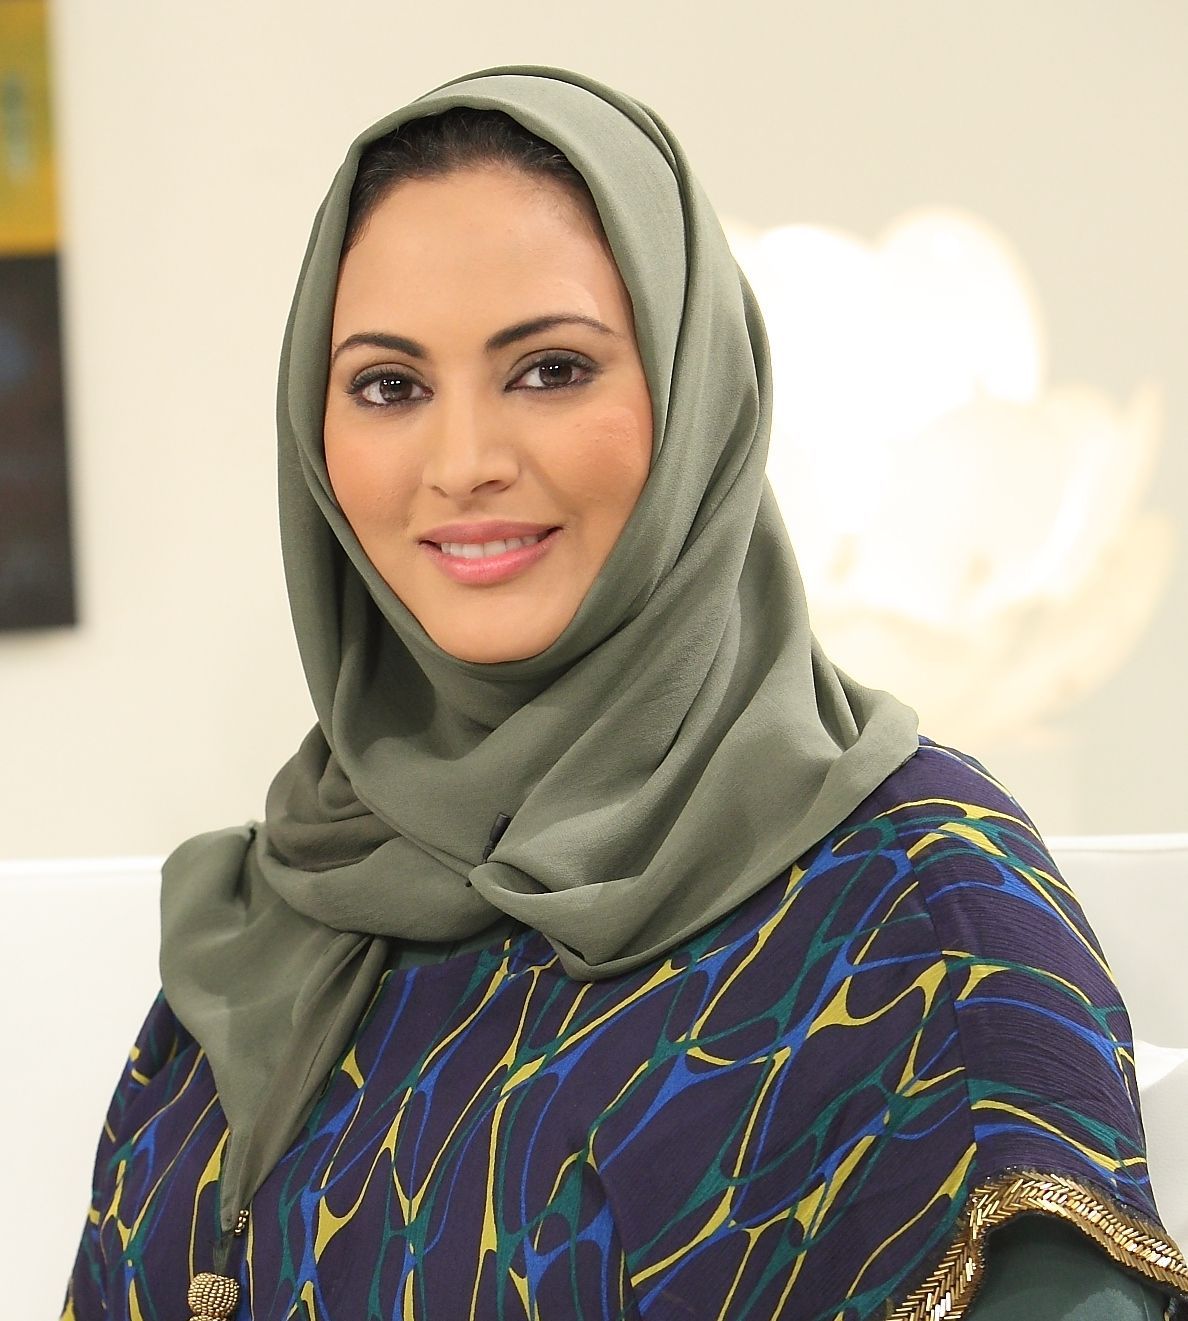 Muna Abu Sulayman is a journalist and TV presenter who hosted the programme Kalam Nawaem. She has become the KSA's UN Goodwill Ambassador.